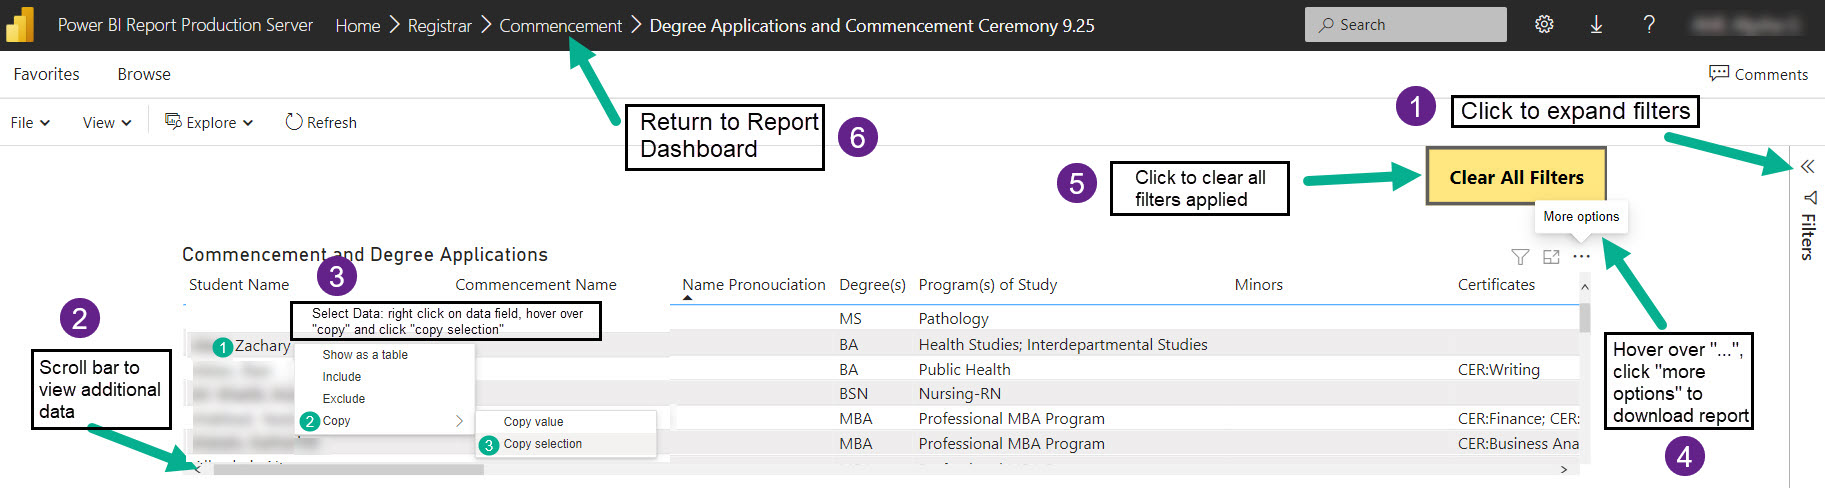 Microsoft Power BI Degree Applicant and Commencement Report